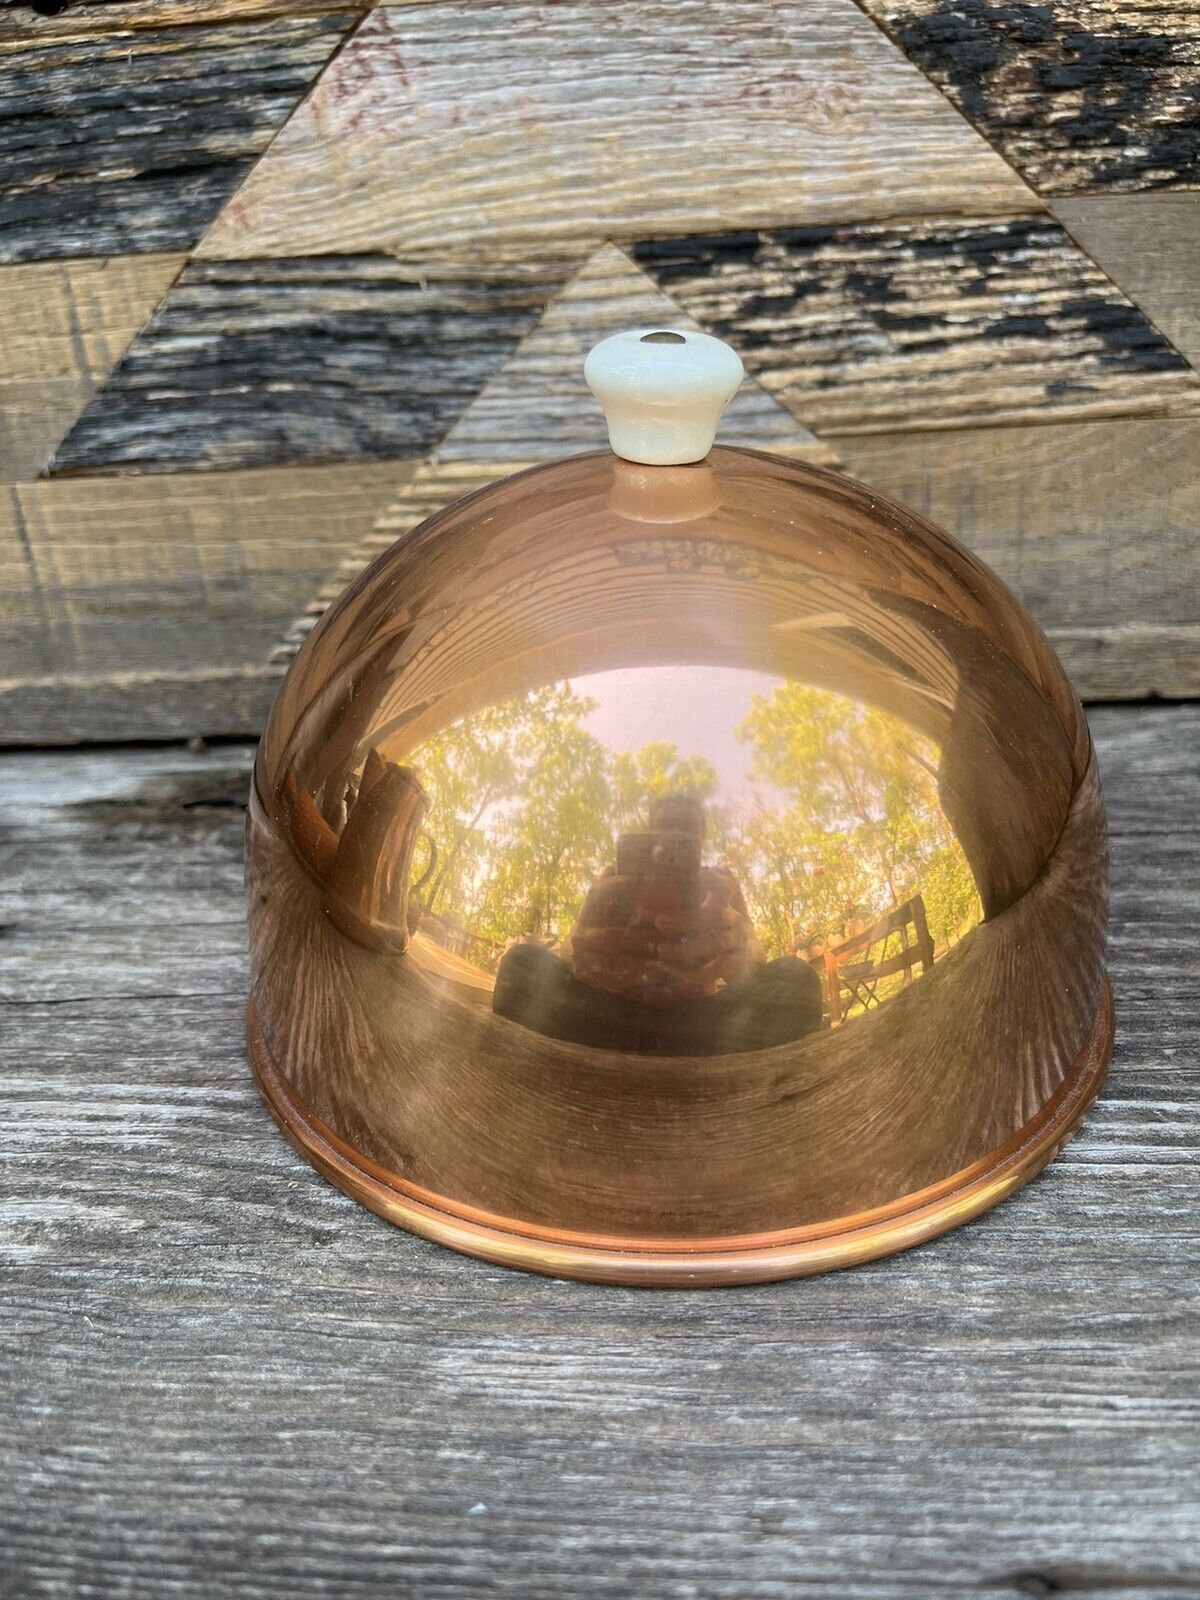 Vintage Benjamin and Medwin Copper Cheese Dome Cloche made in Portugal